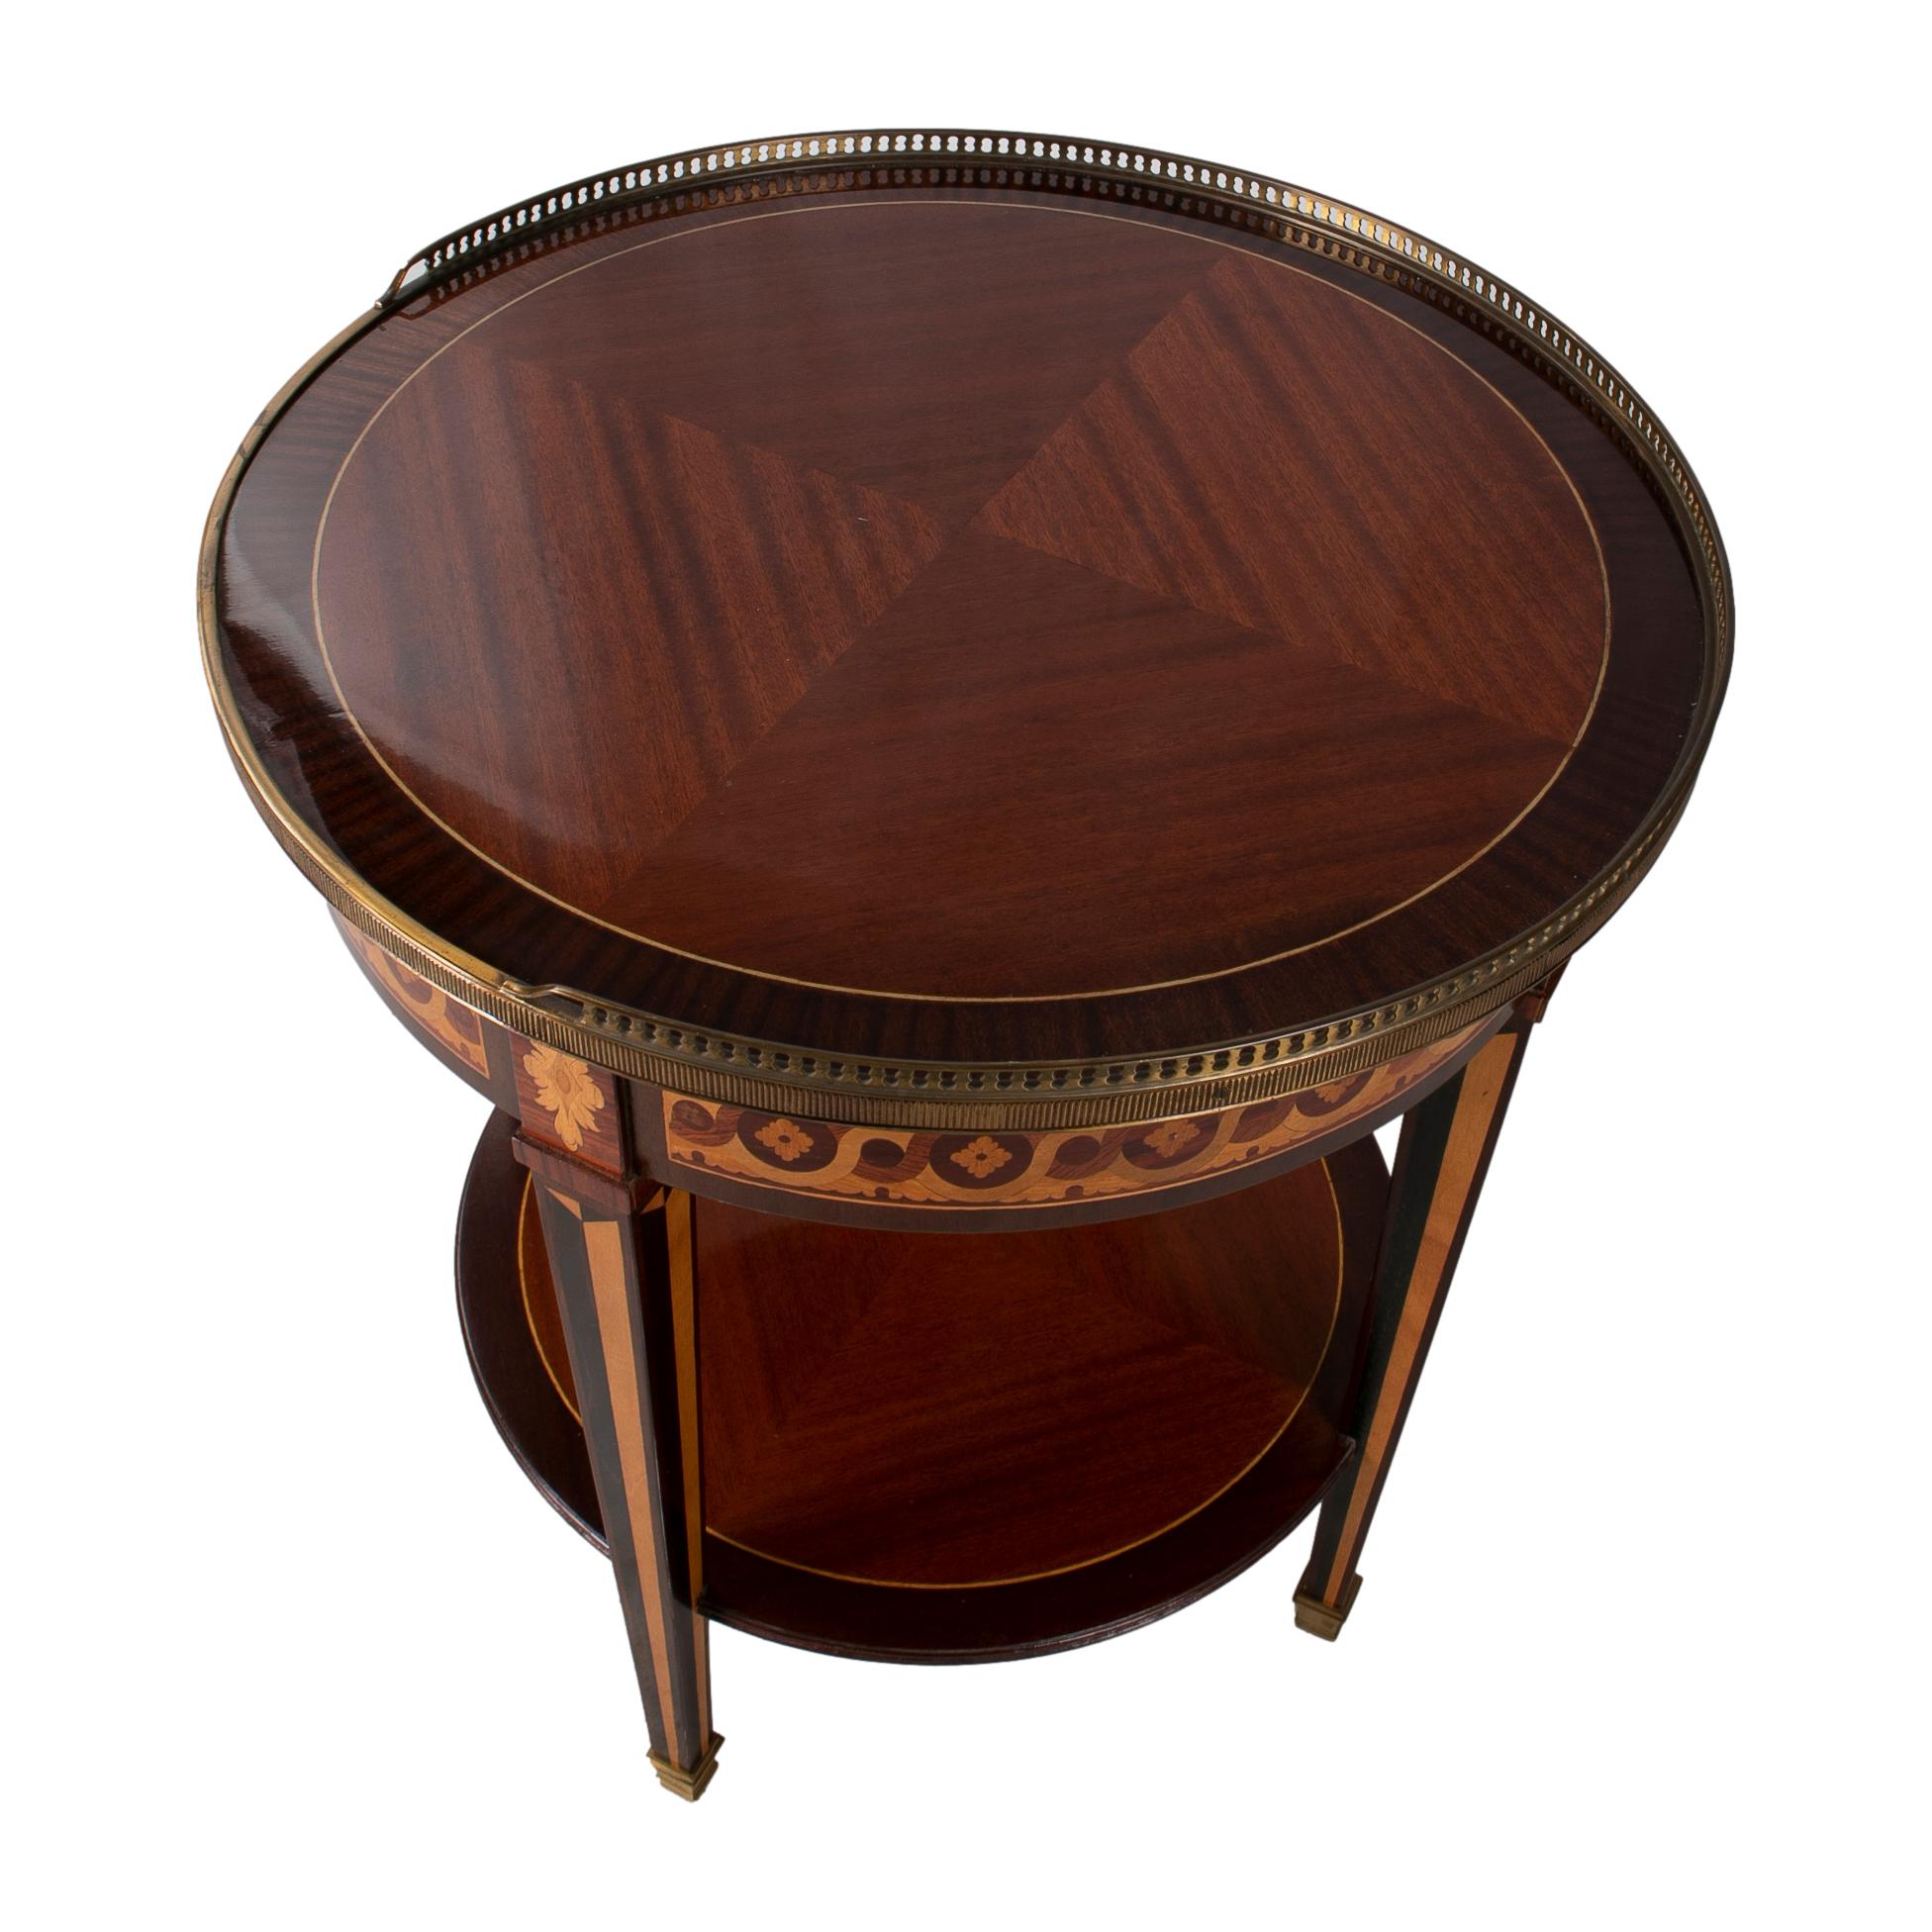 1980s French Mahogany Round Side Table w/ Bronze Decorations & Inlays For Sale 2